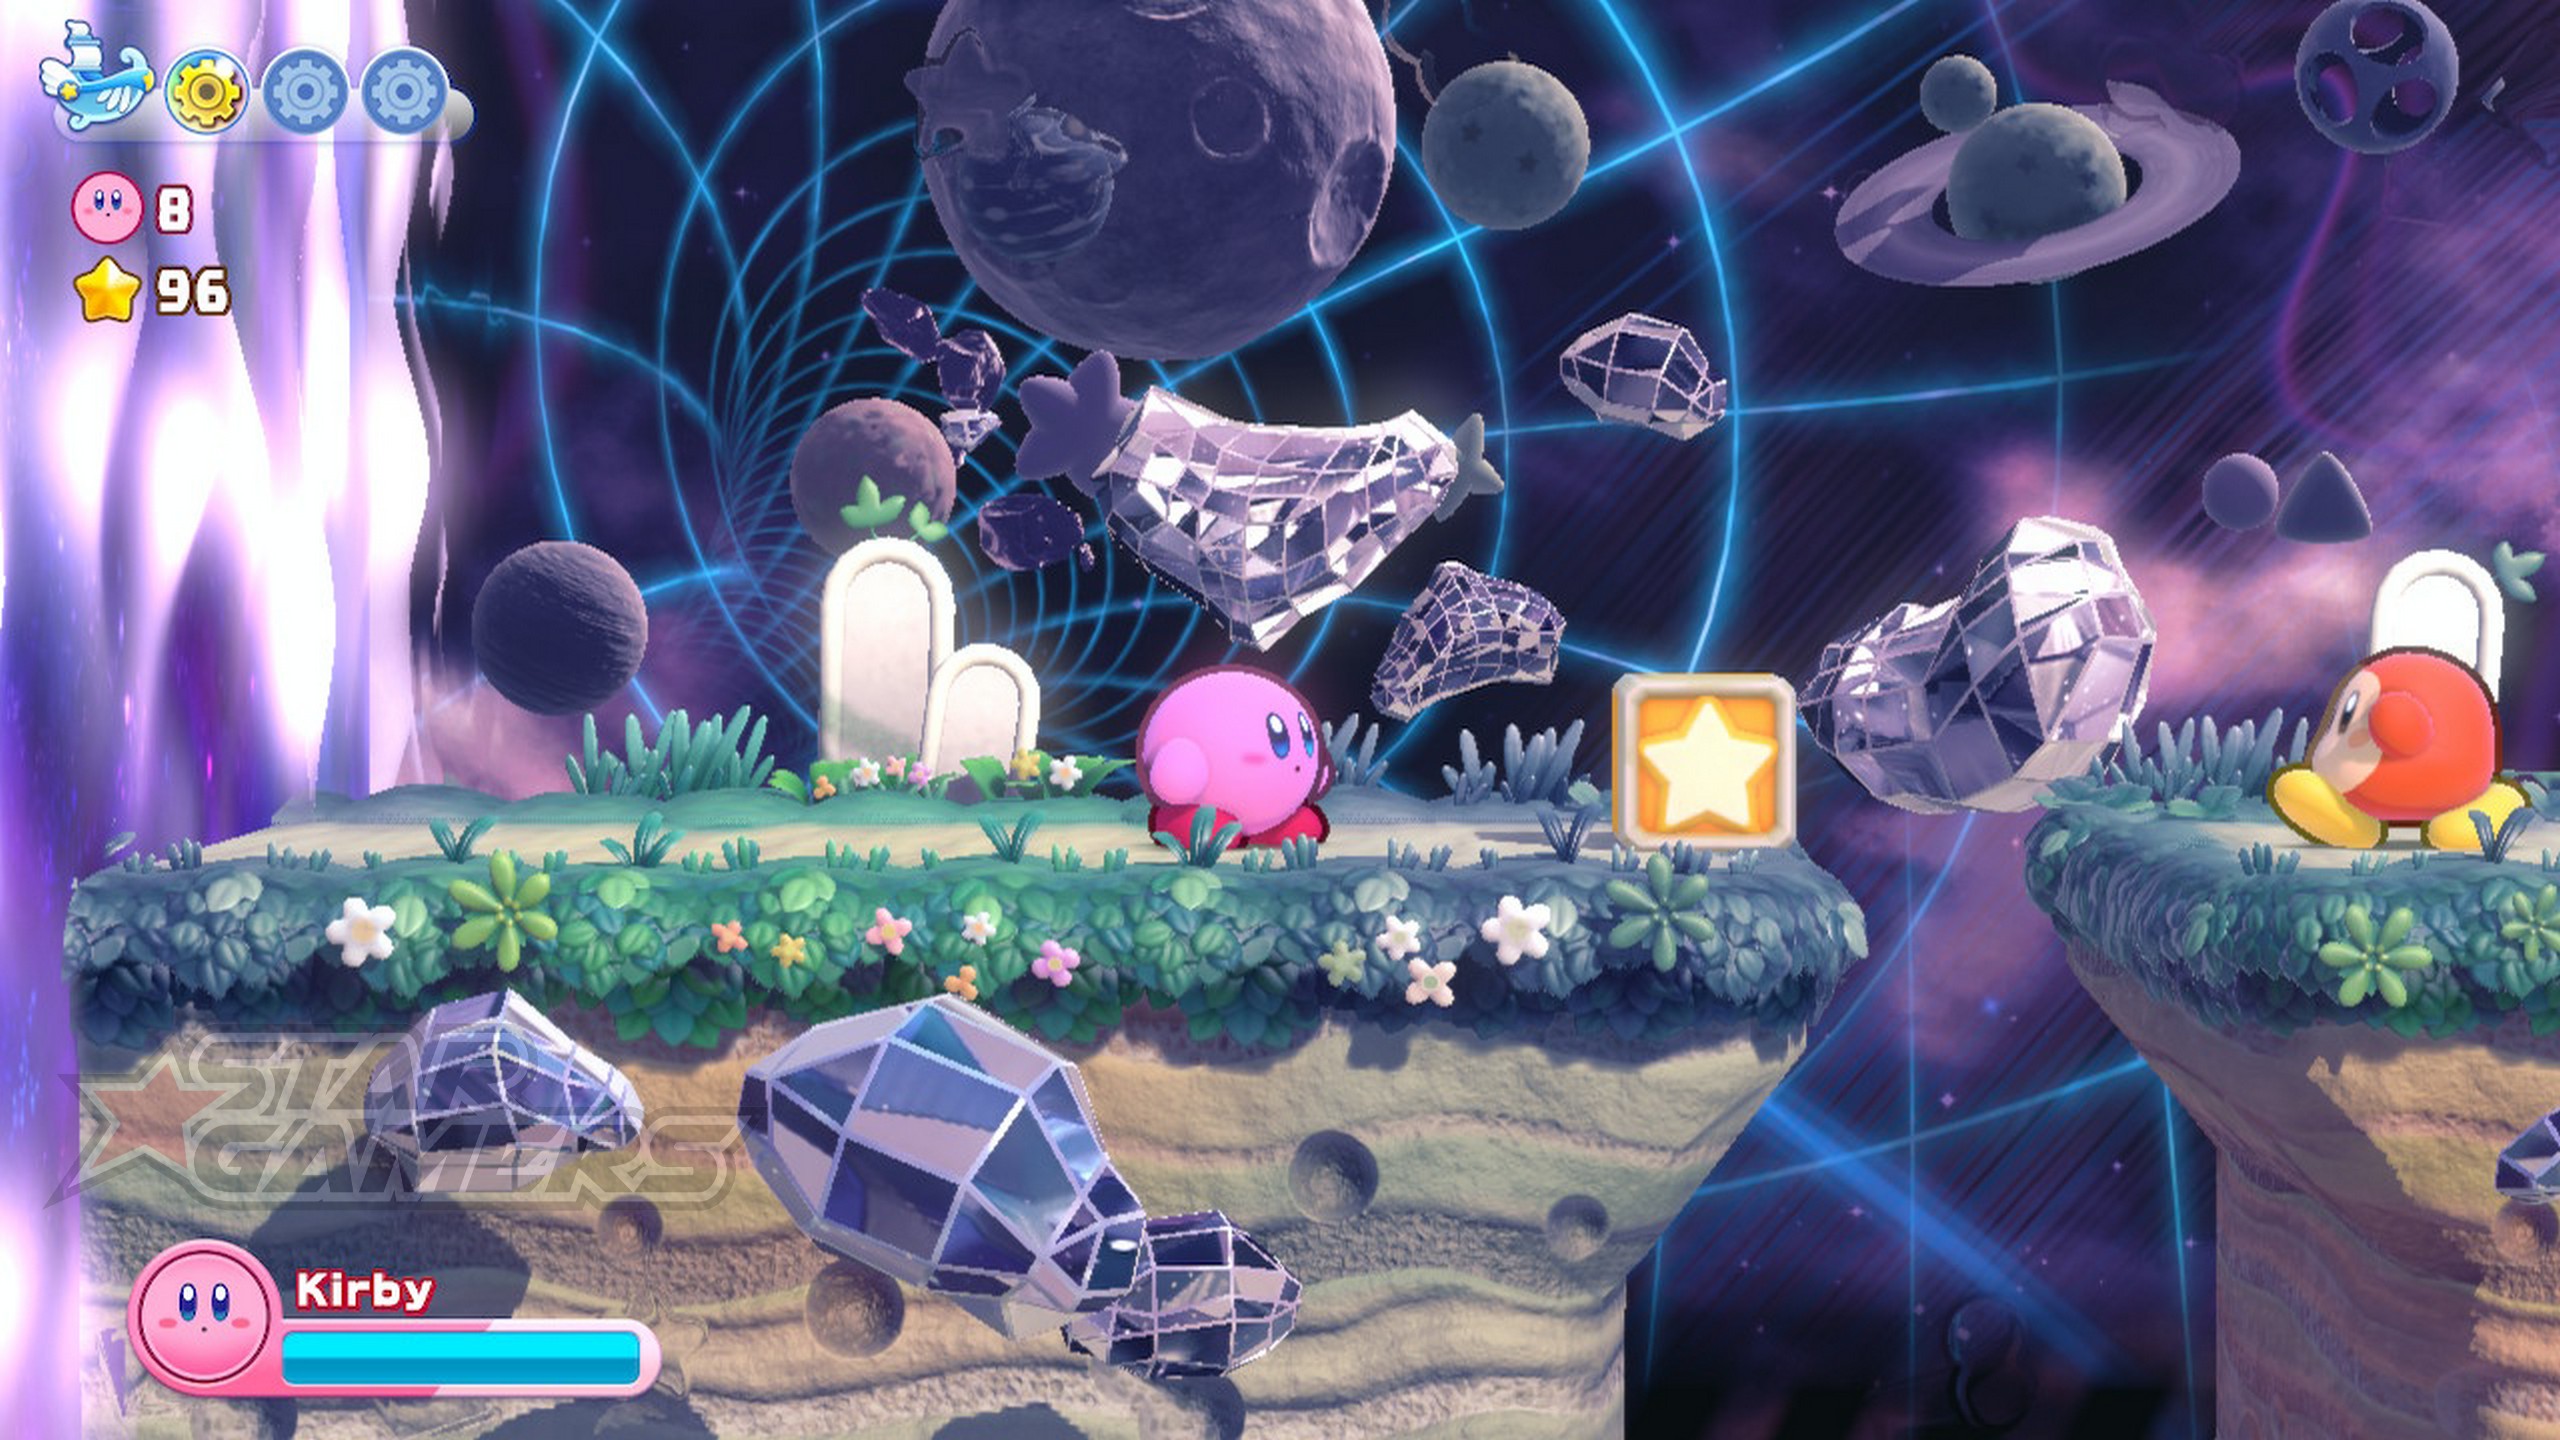 análisis Kirby's Return to Dream Land Deluxe